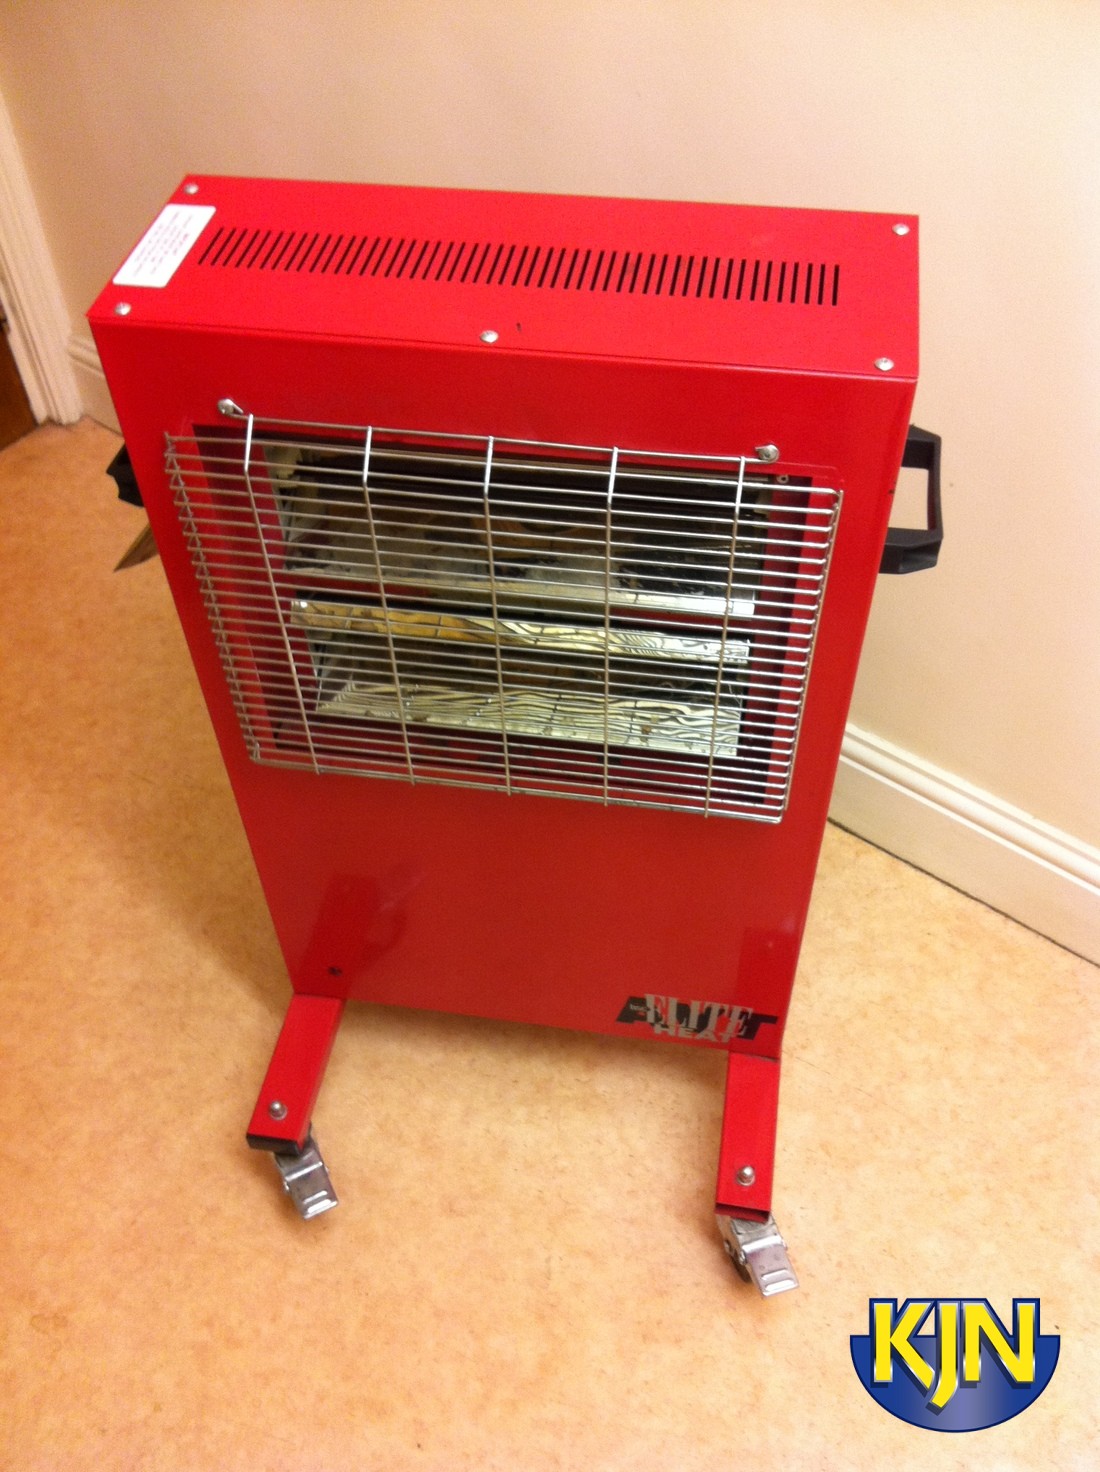 3kw Infra-red Low Level Heater